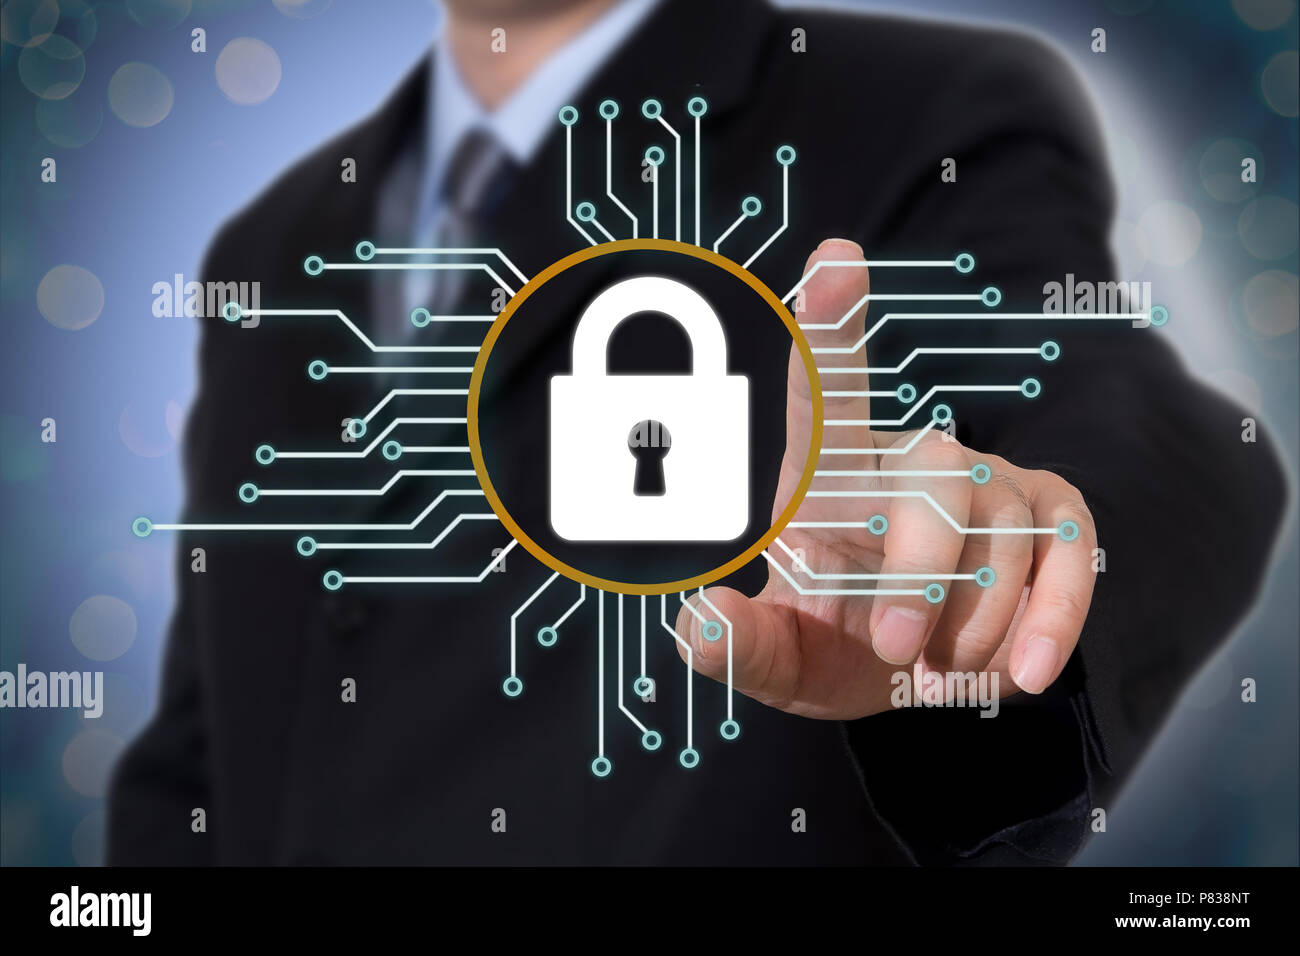 Cyber security concept on virtual screen Stock Photo